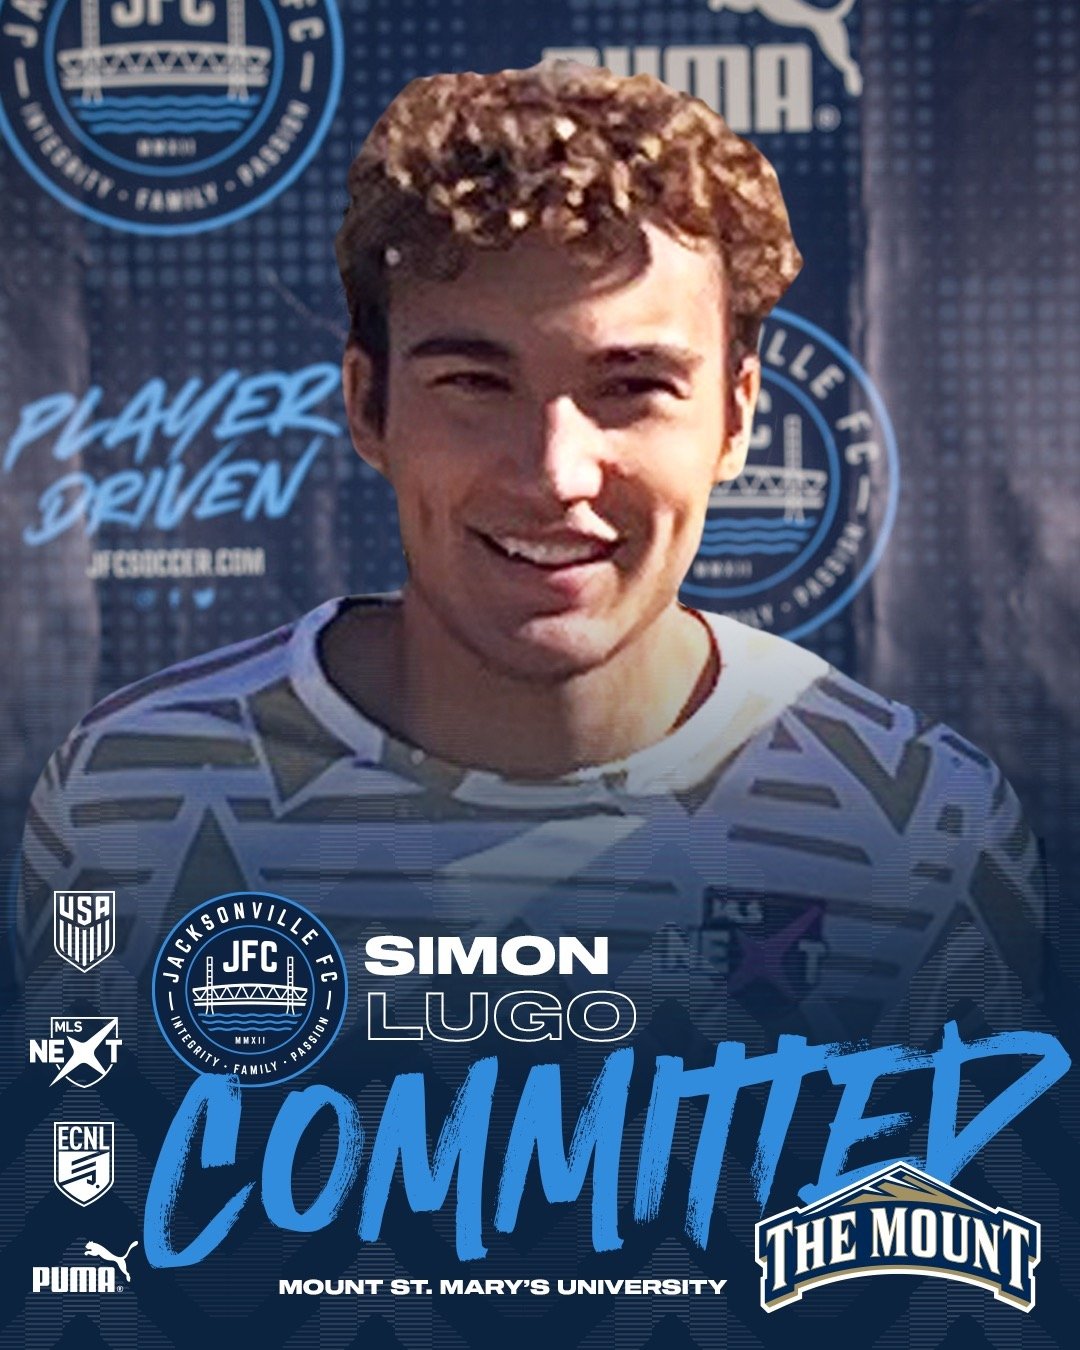 Big Congrats to JFC's Simon Lugo on his commitment to play college soccer at the Division 1 program, Mount St. Mary's University. Your hard work and dedication have paid off Simon and we couldn't be more proud. We look forward to watching you represe